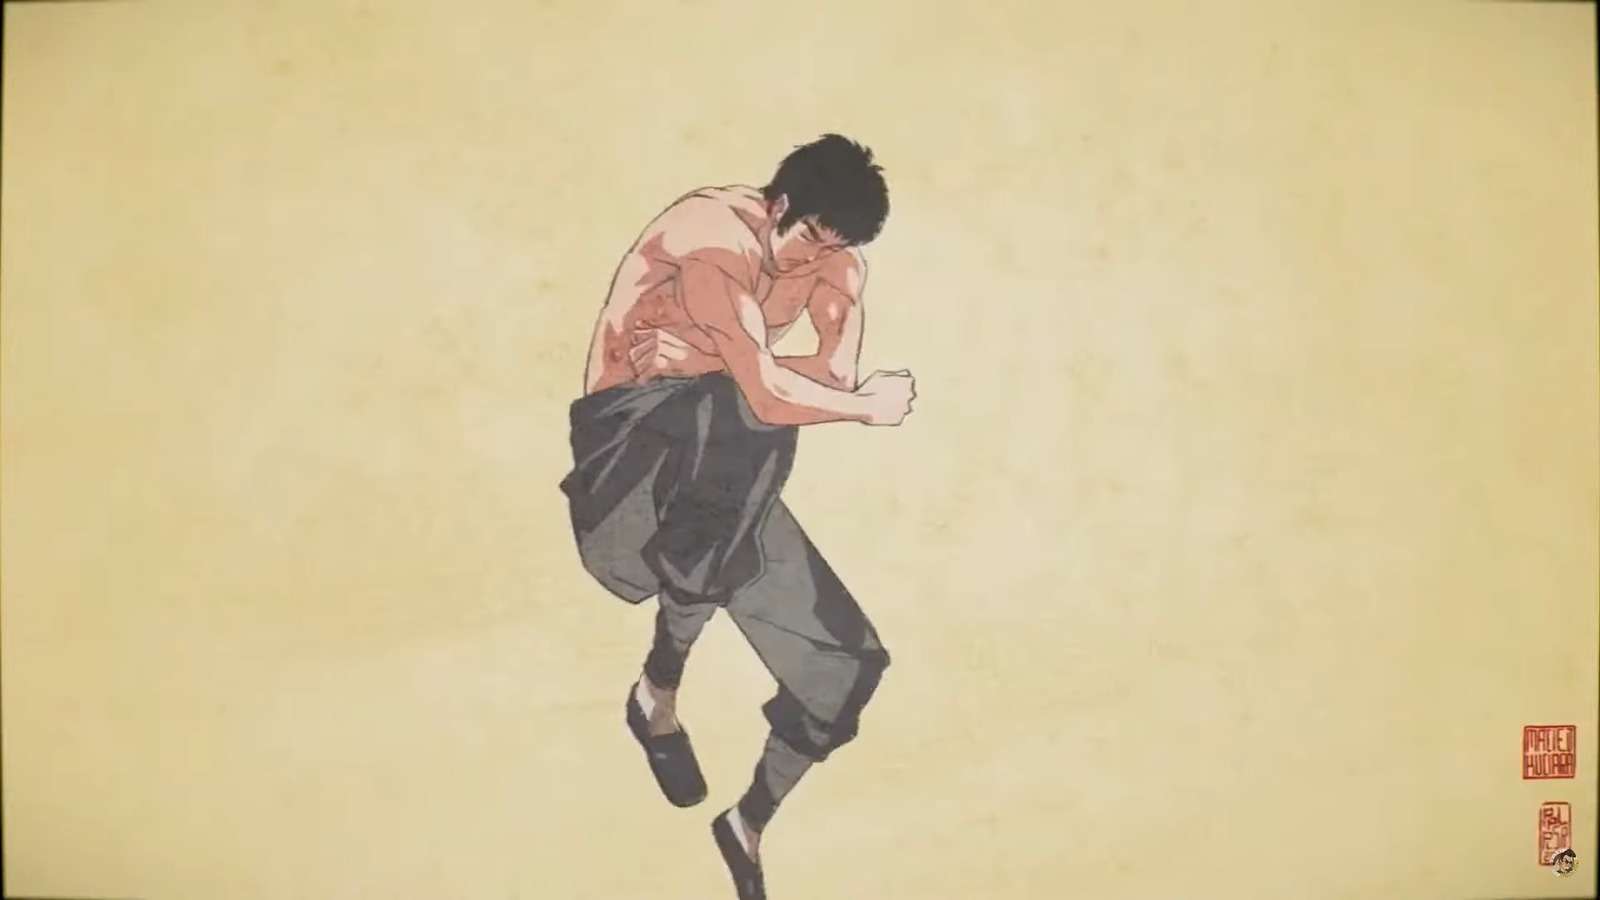 An image of Bruce Lee anime